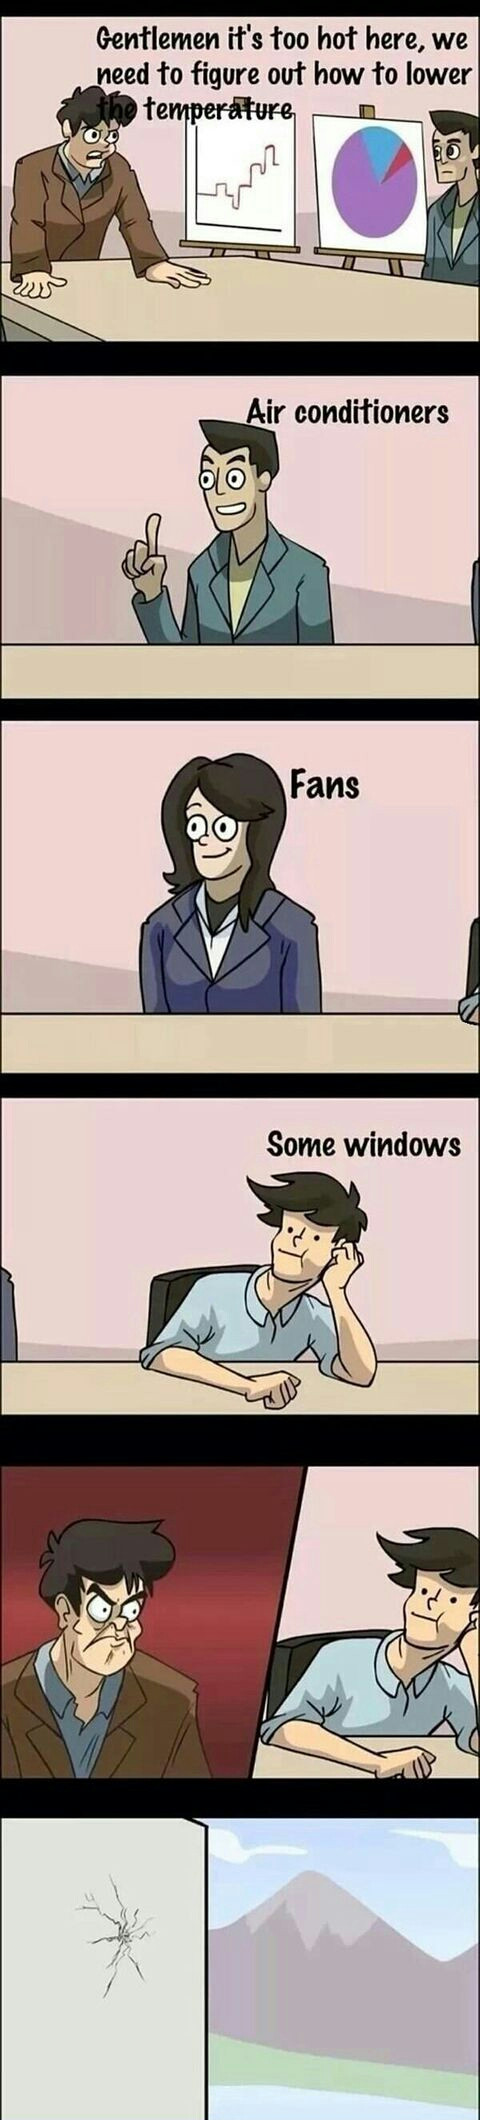 windows?, best one i have seen in a while, meme, comic